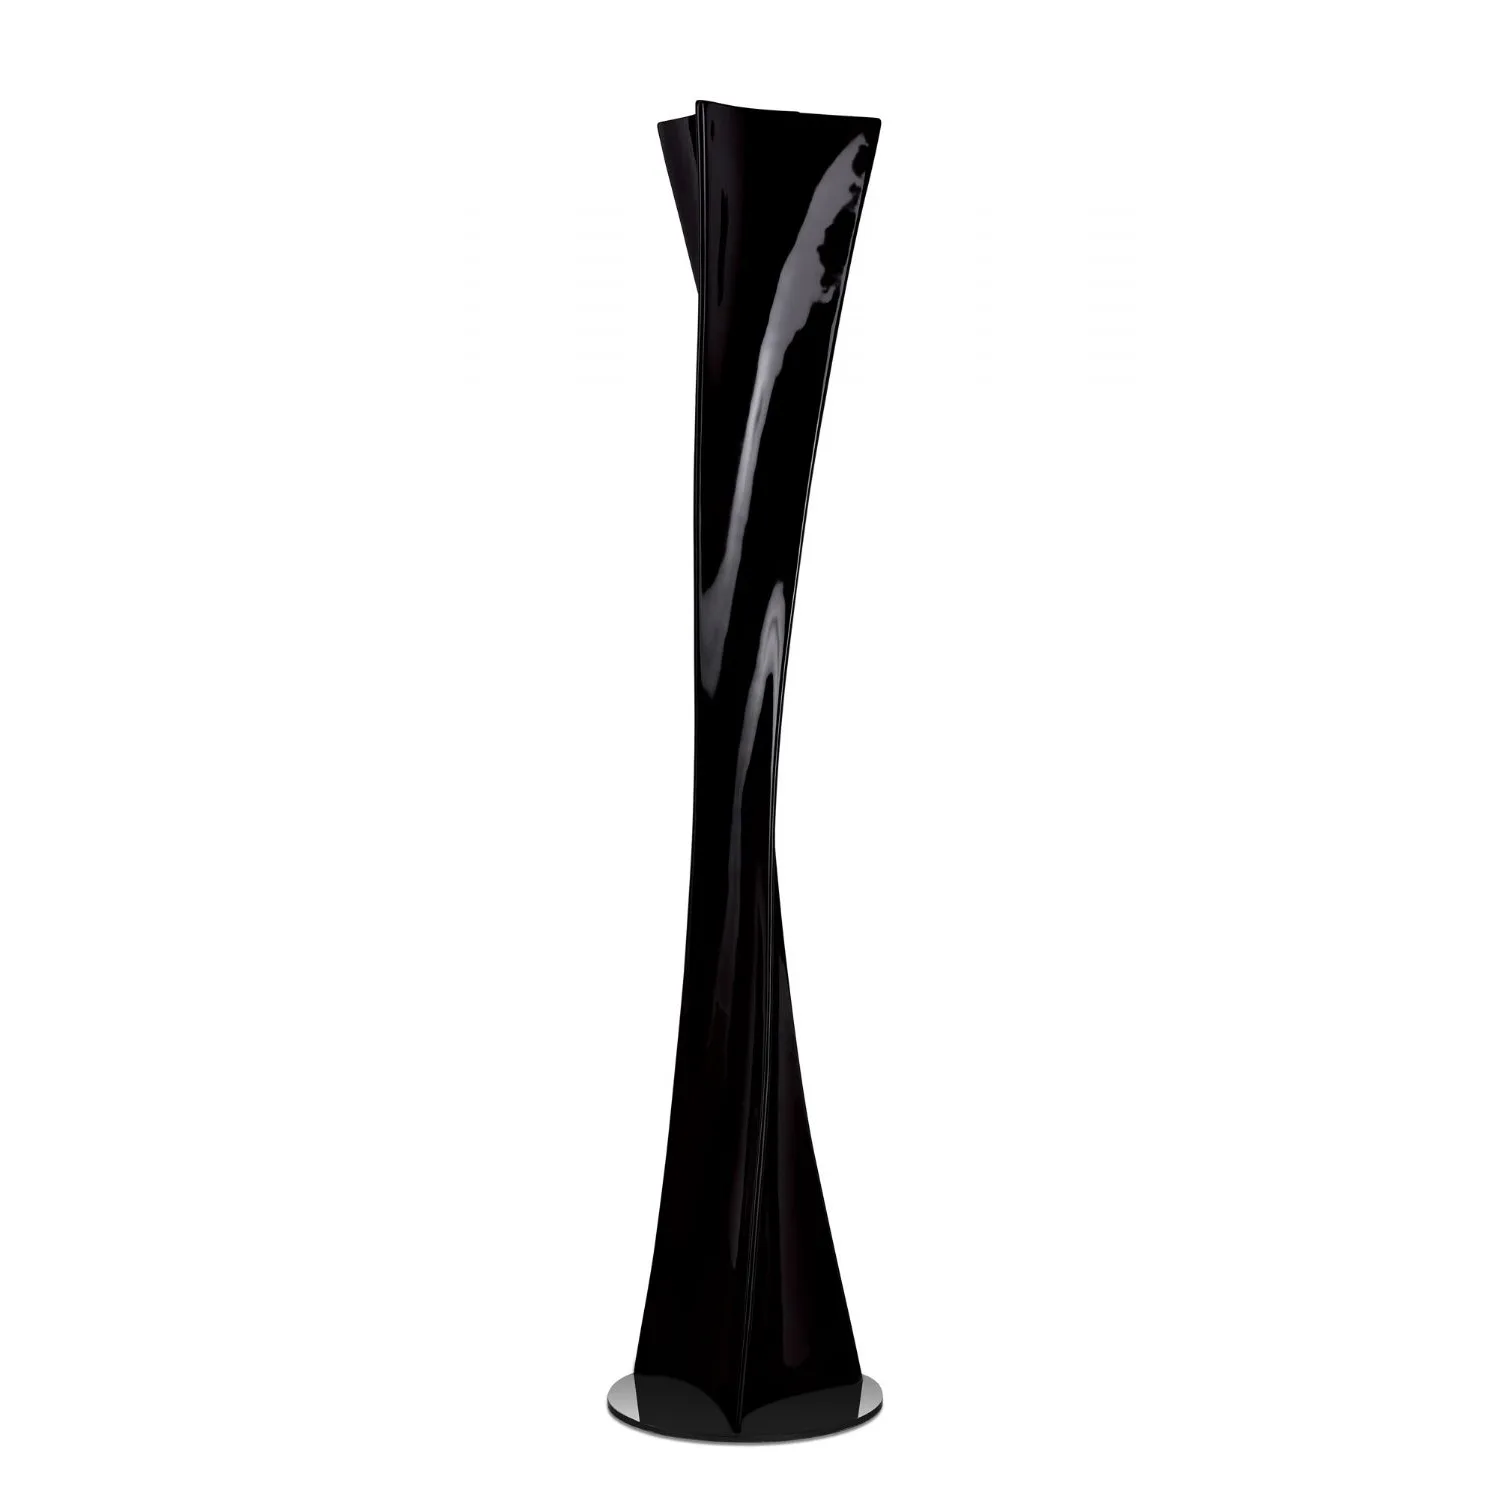 Twist LED Floor Lamp 18W 3000K, Gloss Black Polished Chrome COLLECTION ONLY, 3yrs Warranty, Base Packed Separately Item Weight: 18.5kg